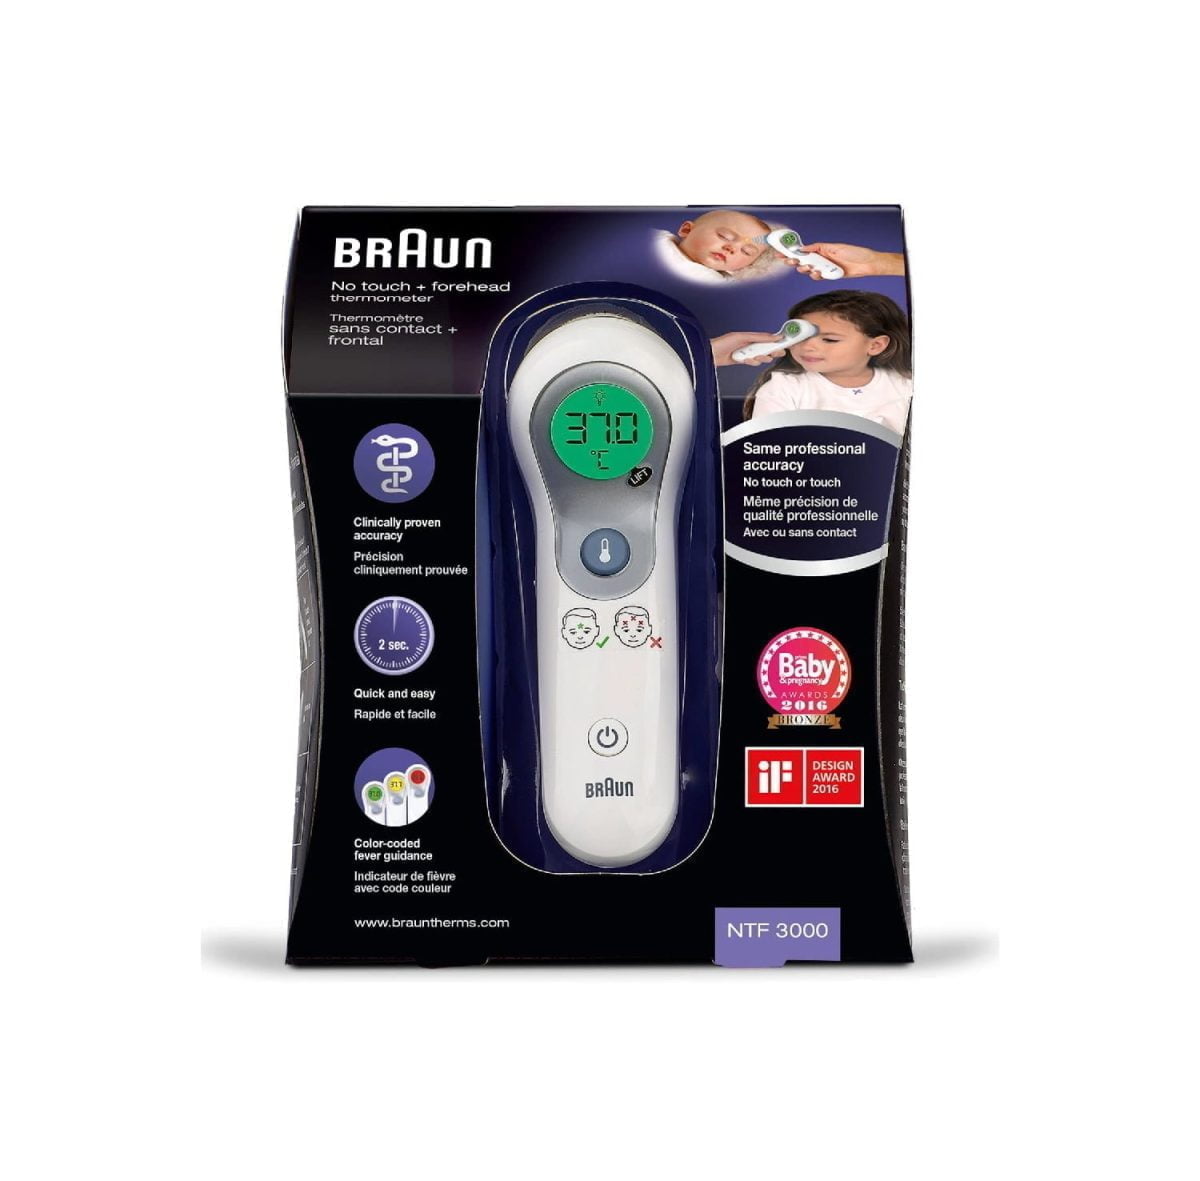 Lablab8 06 Braun &Lt;Div Class=&Quot;Product Attribute Overview&Quot;&Gt; &Lt;Div Class=&Quot;Value&Quot;&Gt; &Lt;Ul&Gt; &Lt;Li&Gt;Quick And Convenient Measurement In Both No Touch And Touch Mode&Lt;/Li&Gt; &Lt;Li&Gt;Colour-Coded Temperature Guidance&Lt;/Li&Gt; &Lt;Li&Gt;Silent Mode&Lt;/Li&Gt; &Lt;/Ul&Gt; [Video Width=&Quot;720&Quot; Height=&Quot;404&Quot; Mp4=&Quot;Https://Lablaab.com/Wp-Content/Uploads/2020/05/B1T8F7T-Ias.mp4&Quot;][/Video] &Lt;/Div&Gt; &Lt;/Div&Gt; Braun No Touch Plus Touch Forehead Thermometer (Ntf3000)